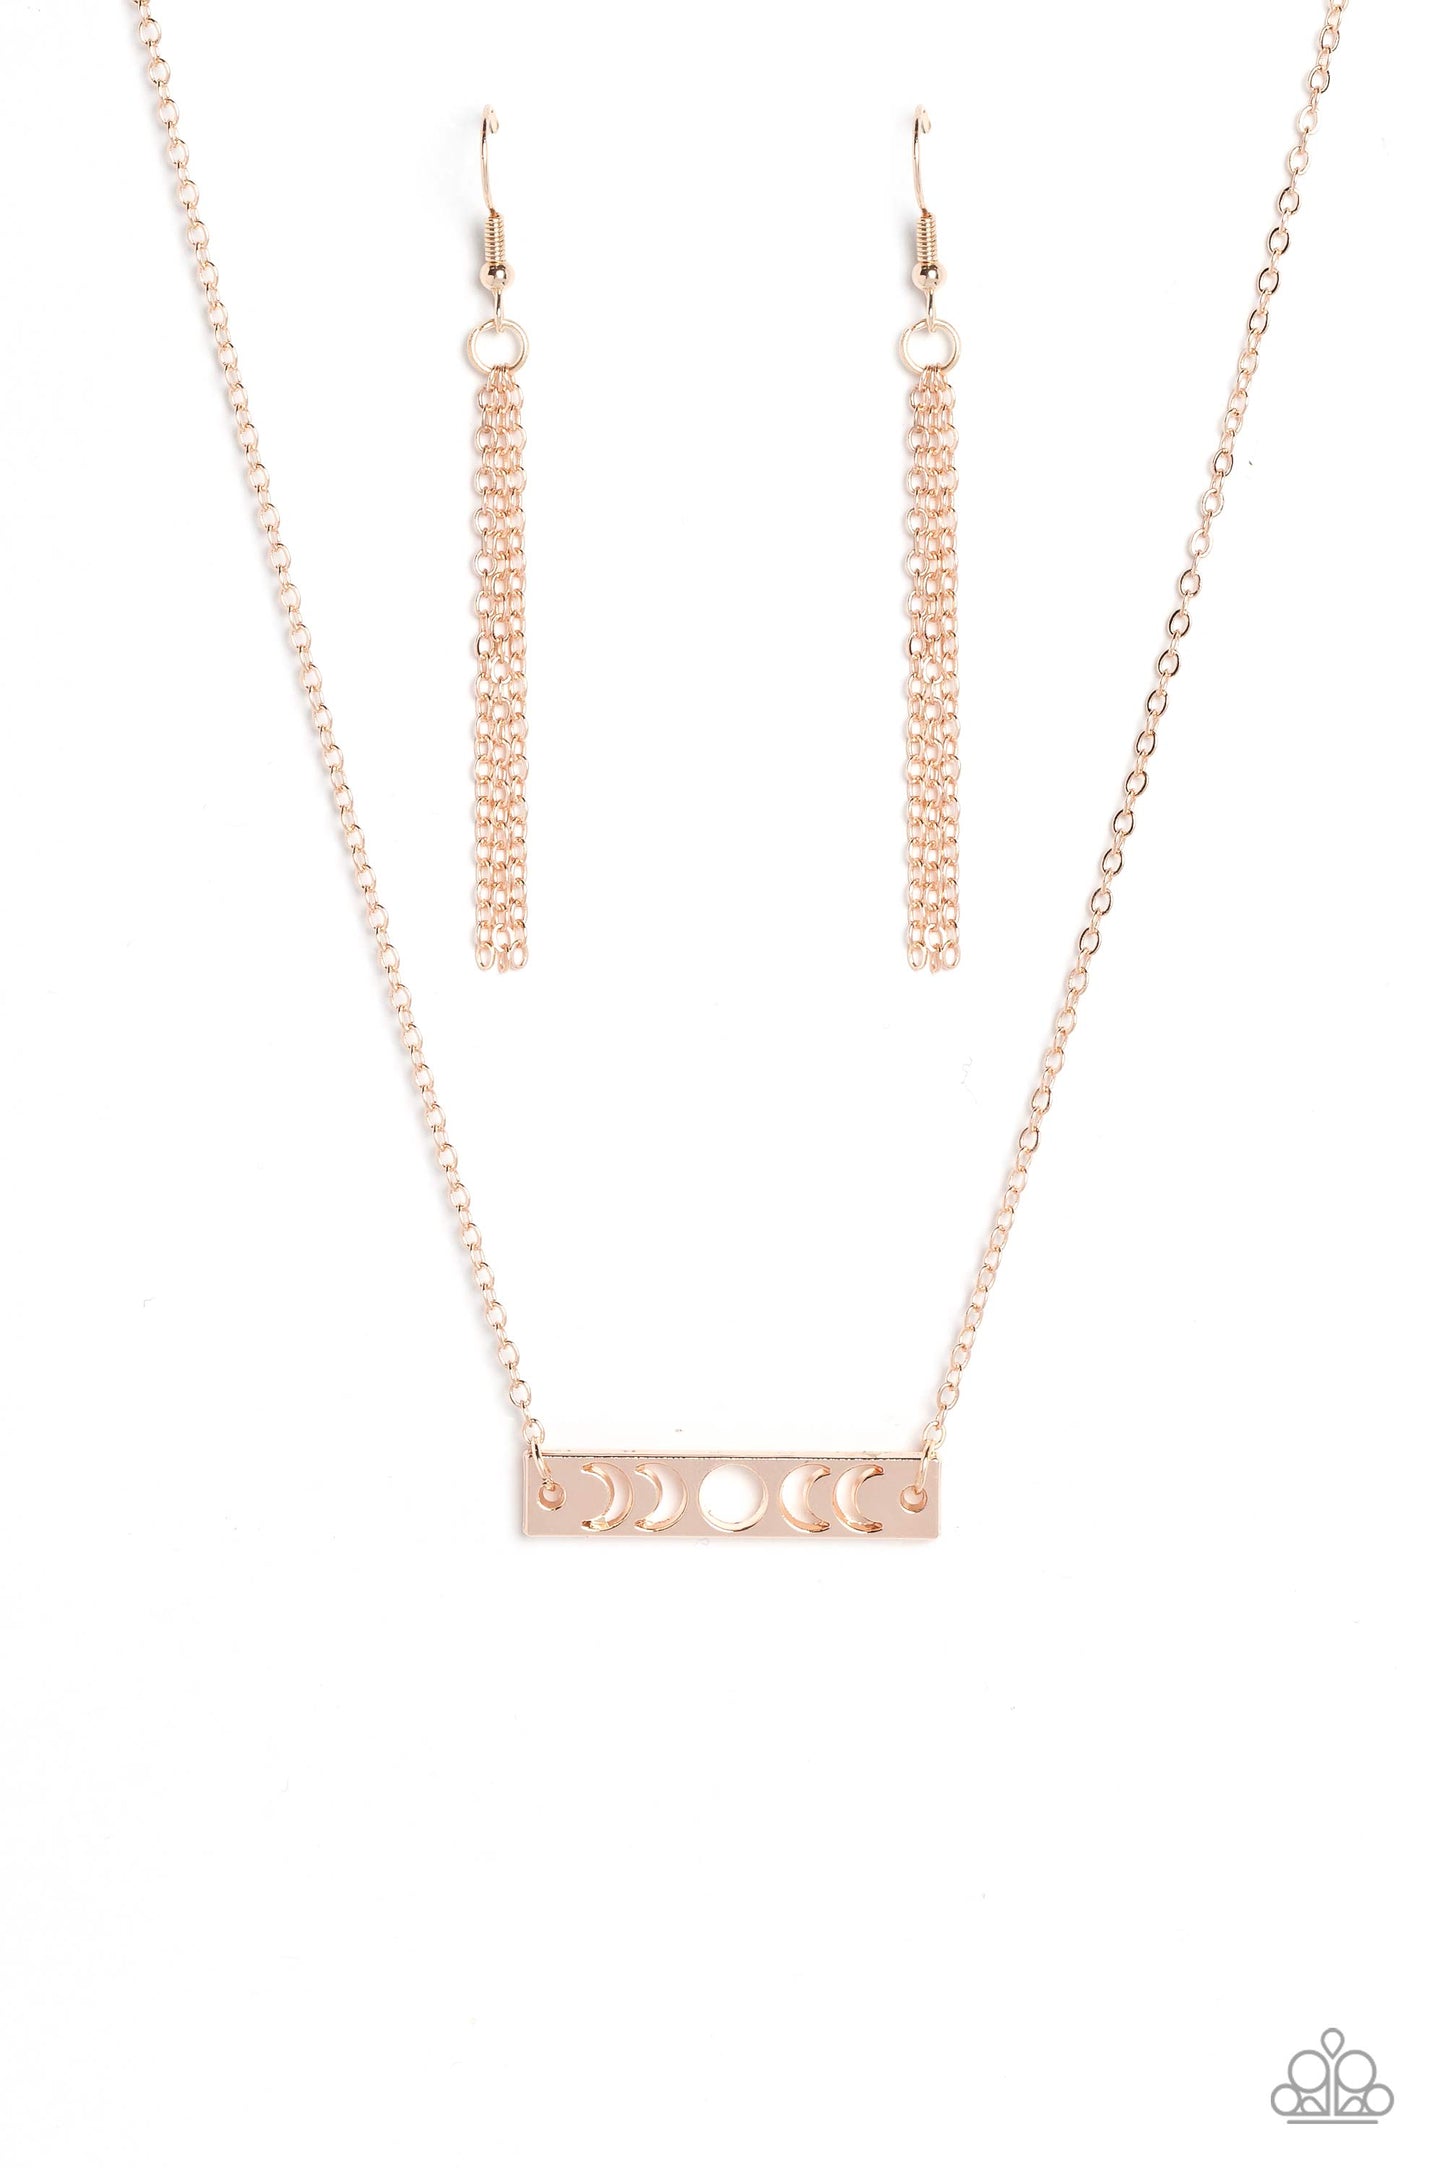 LUNAR or Later - rose gold - Paparazzi necklace